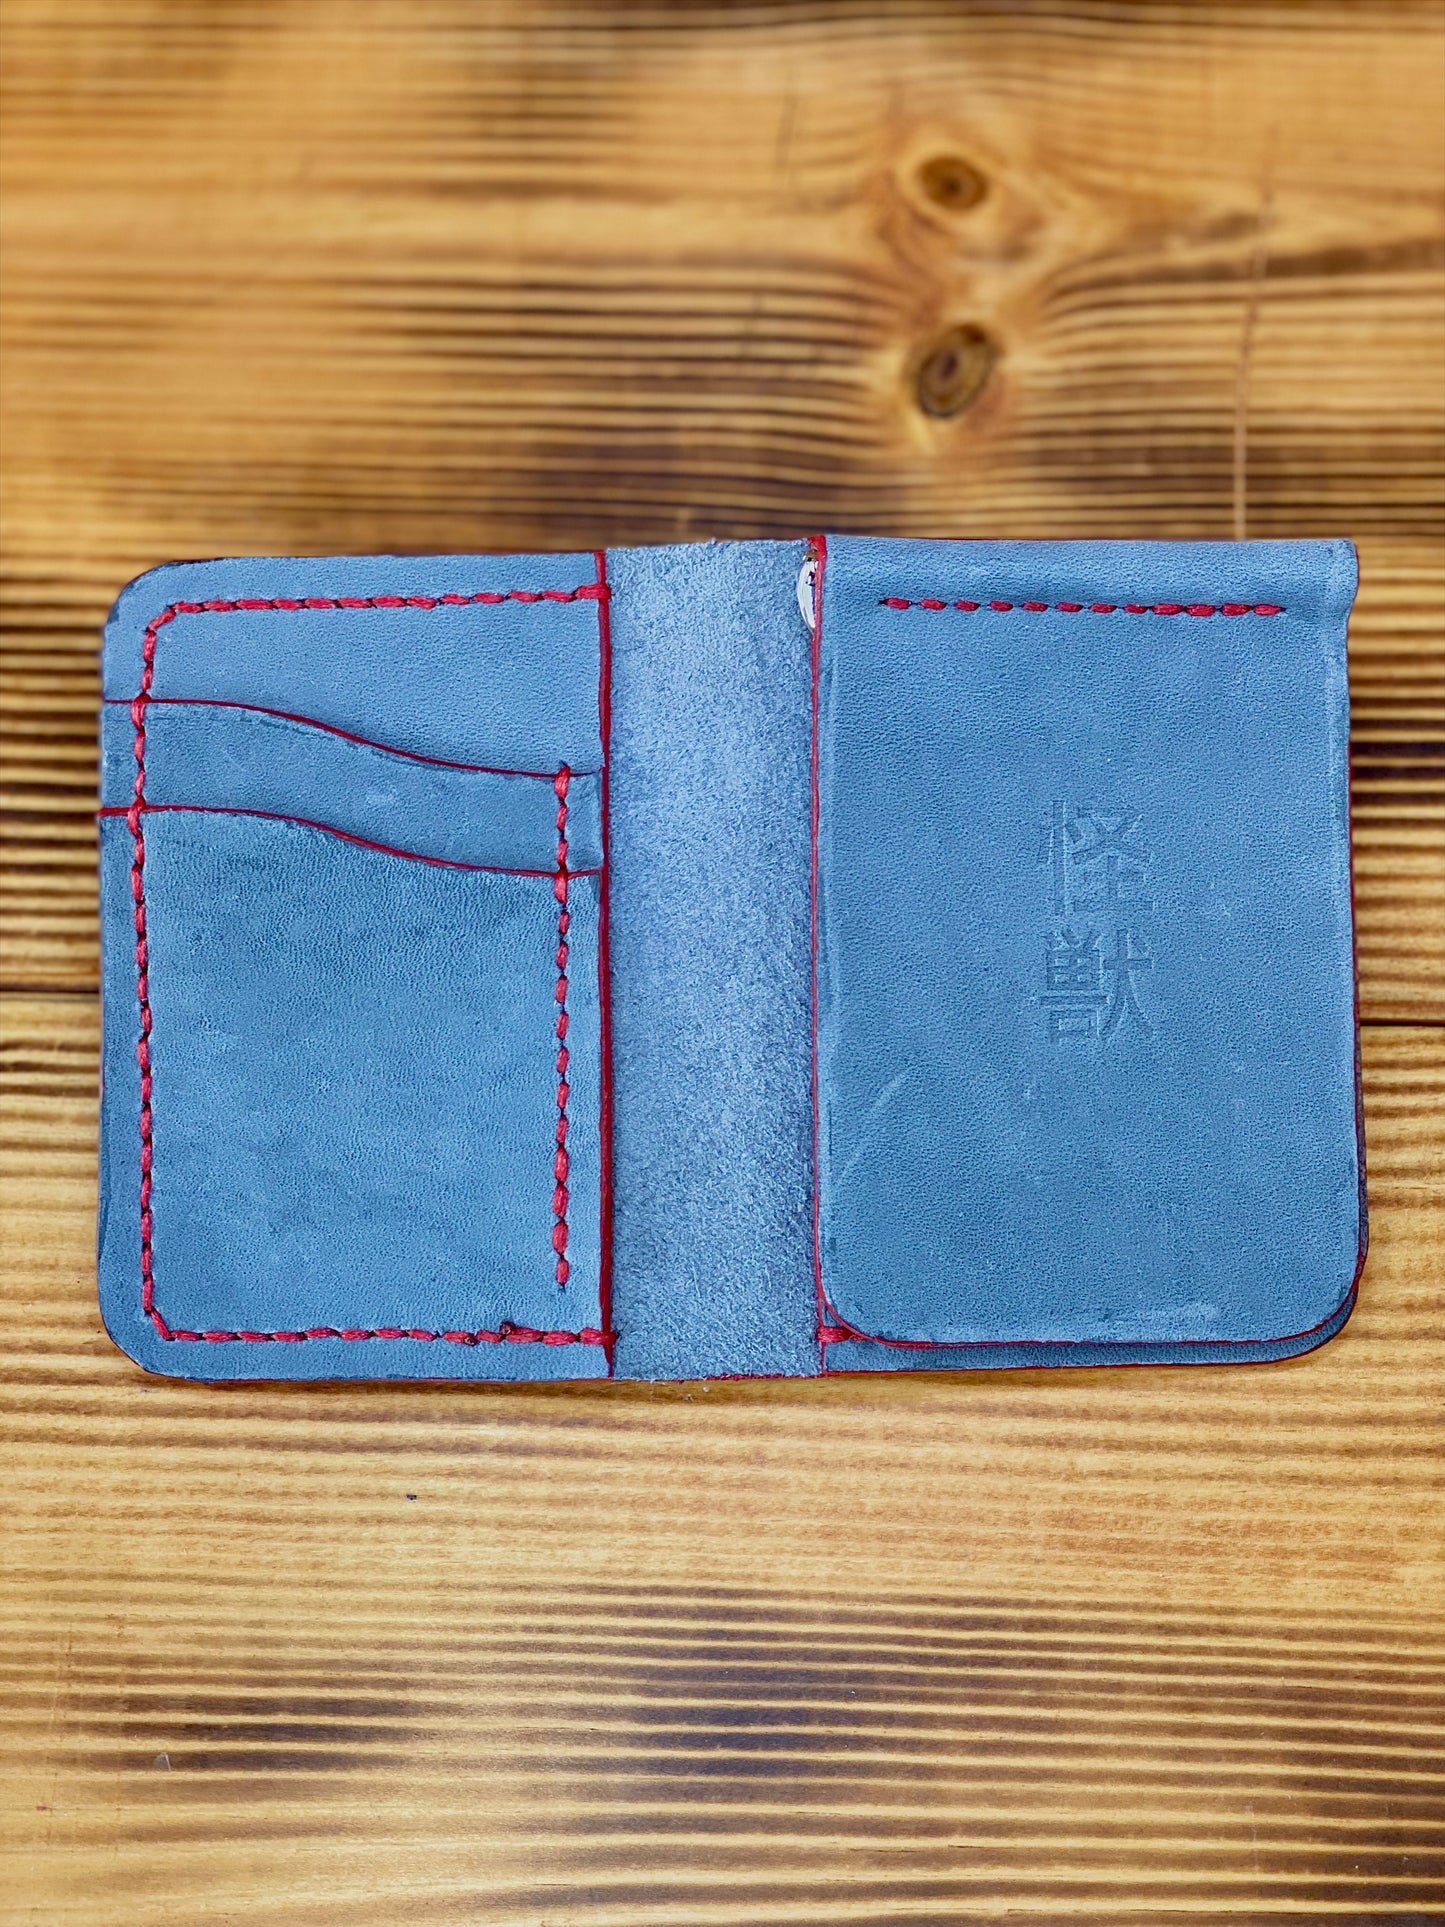 Kaiju Cut and Sew Gray Horween Leather Bi-Fold Vertical Wallet with Money Clip | Handmade in Austin, TX